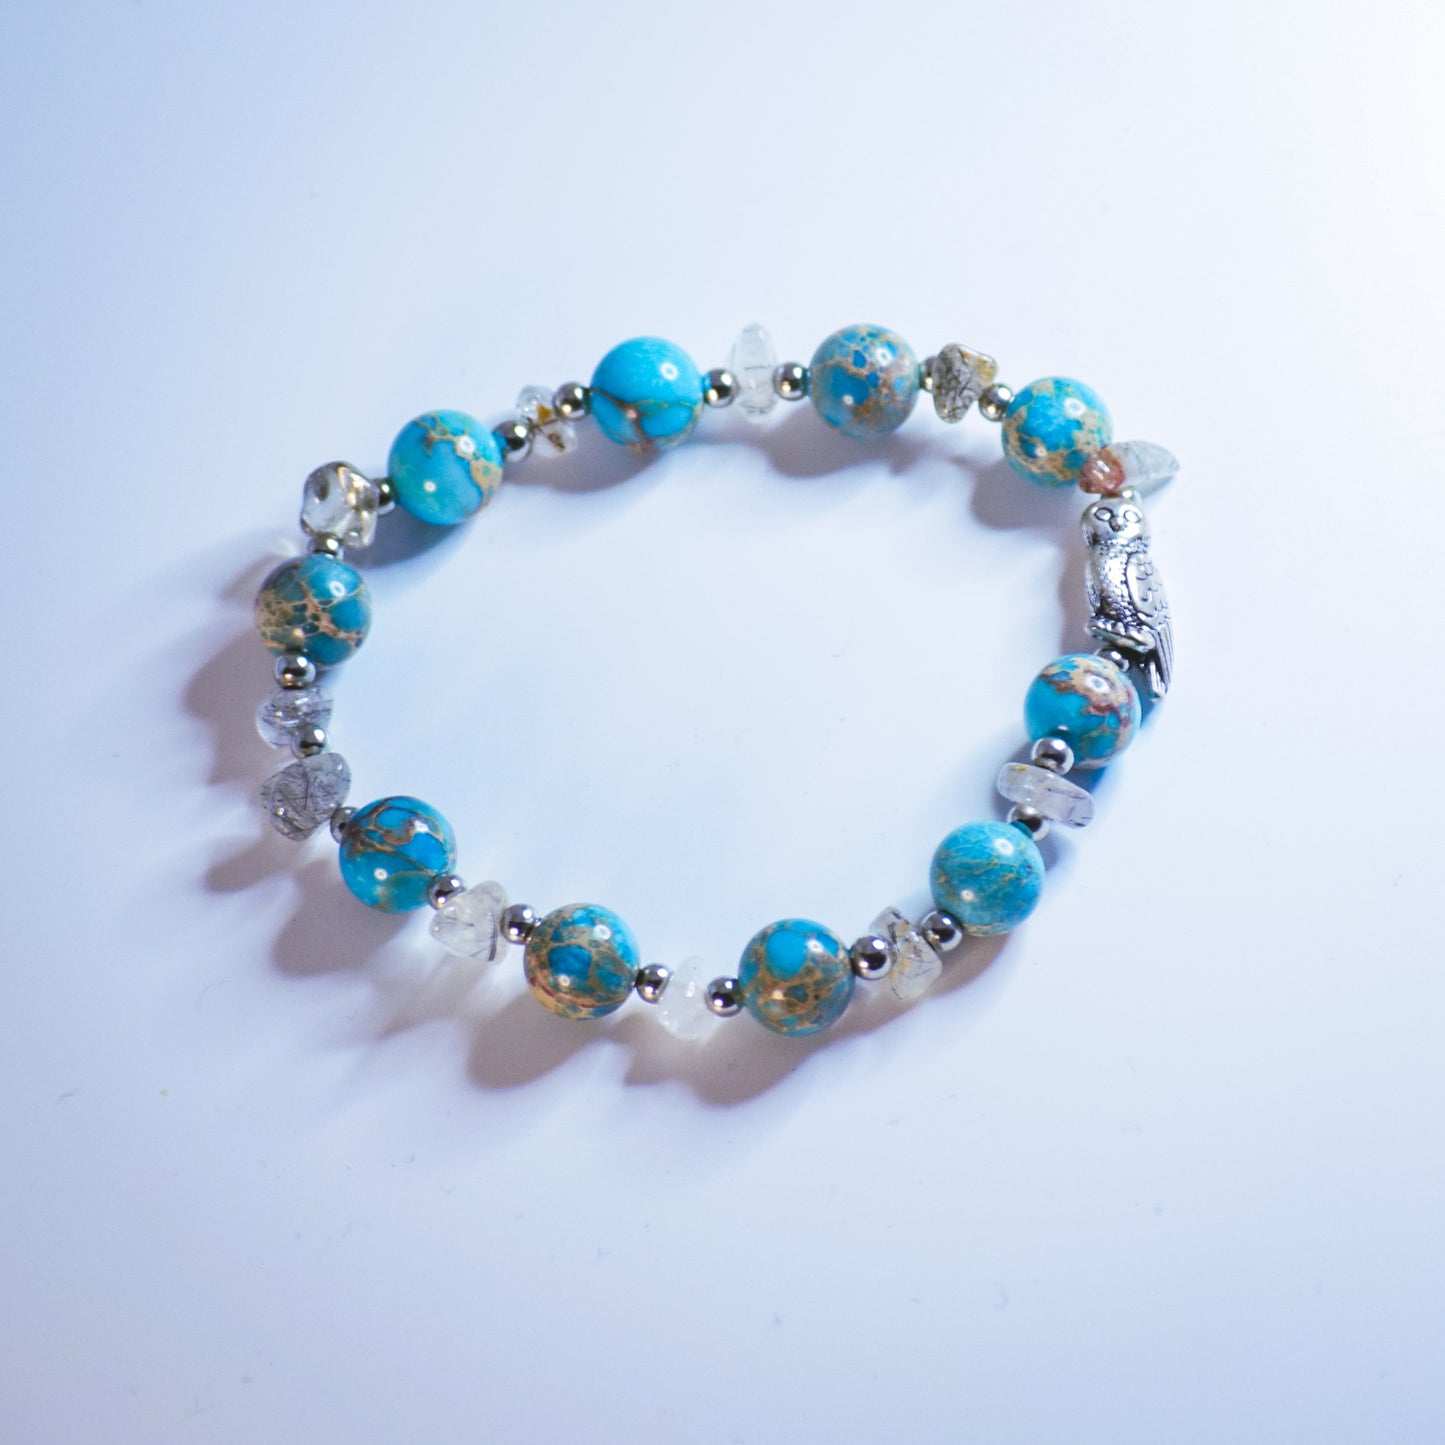 Modern Reign’s Turquoise and Rutilated beaded bracelet